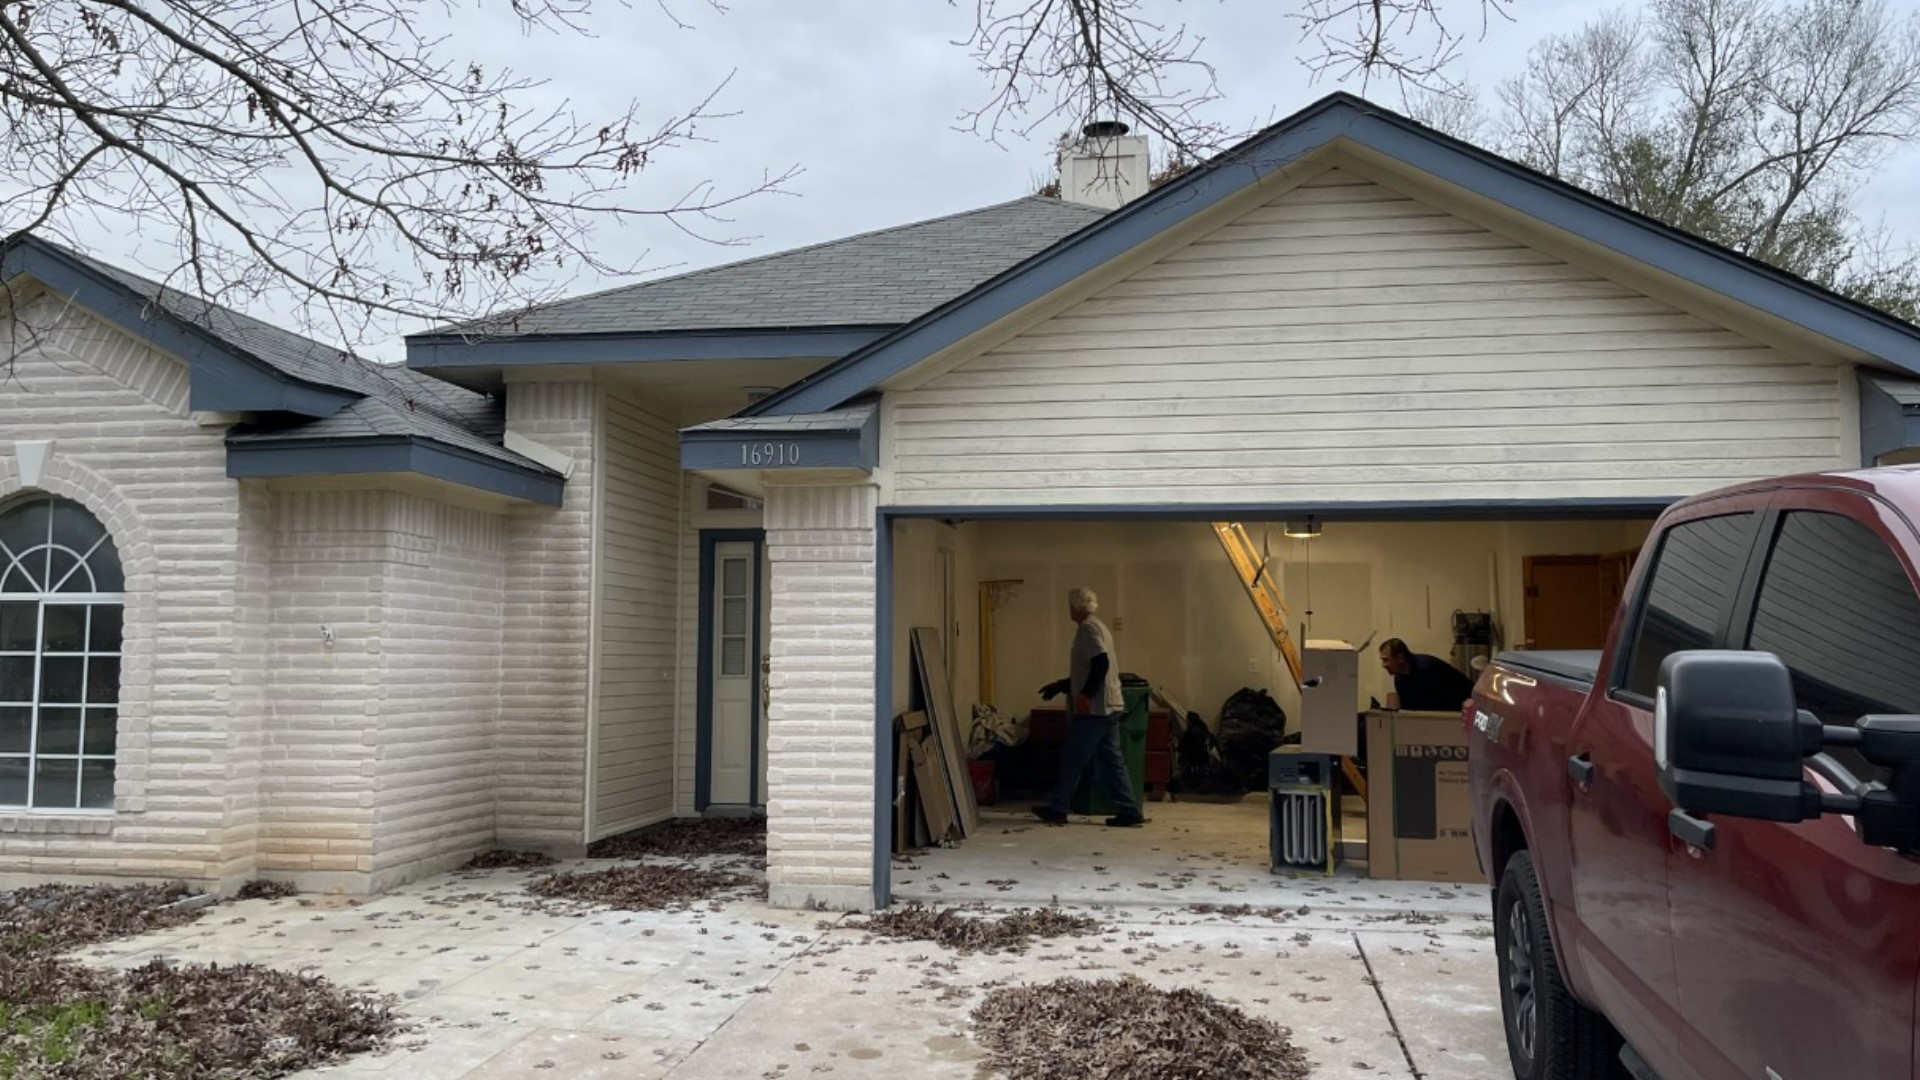 Residents in the newly purchased home will be connected with resources while also learning skills of what it's like to manage a property.